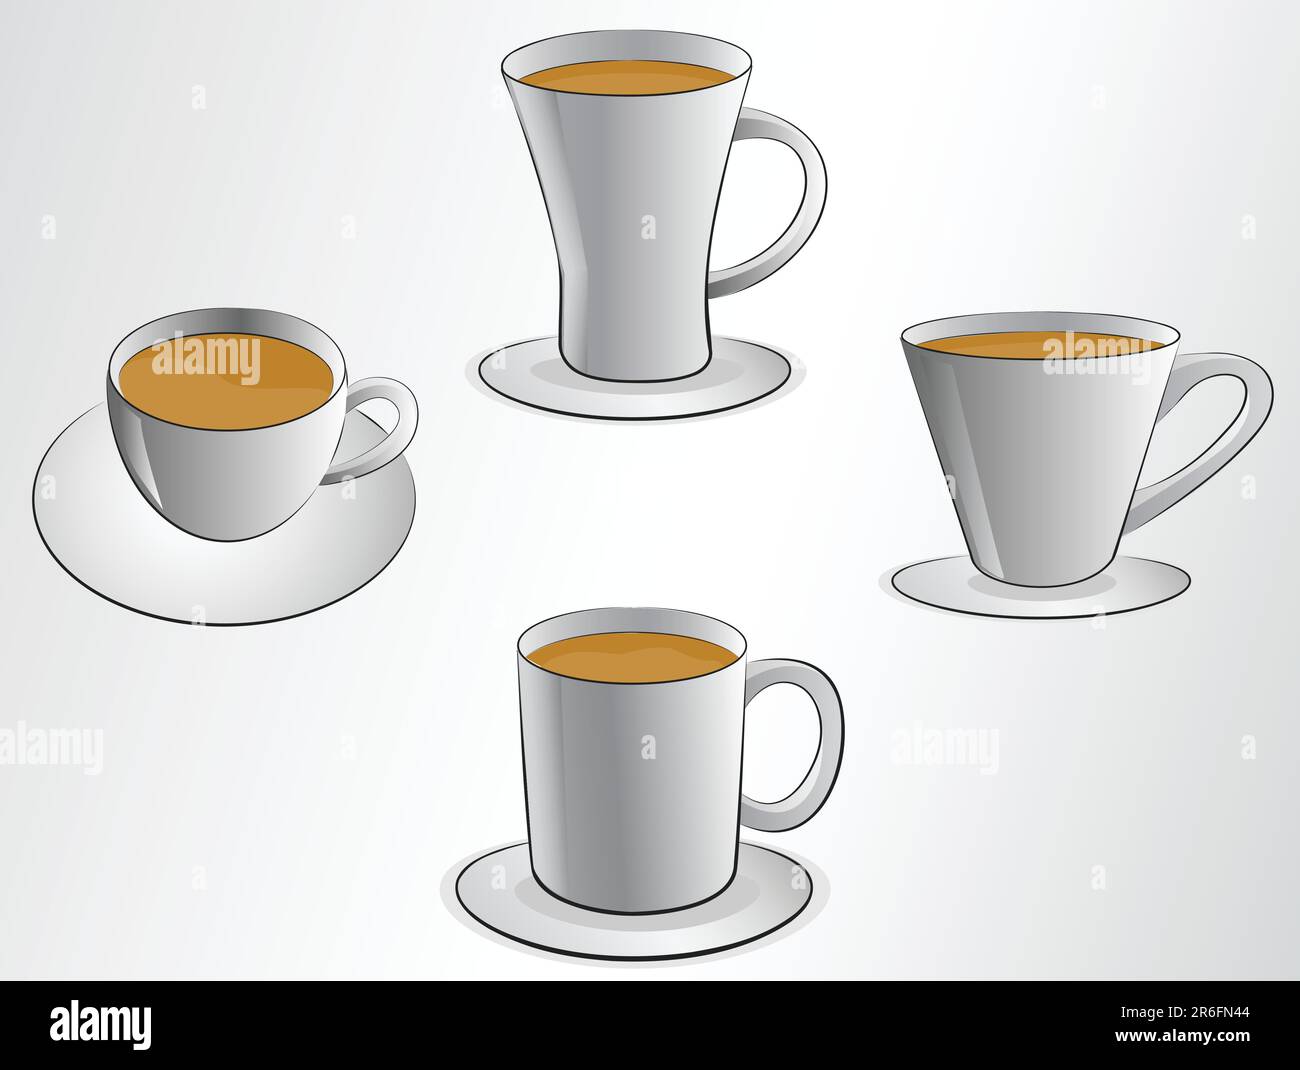 coffee cups vector illustrations Stock Vector